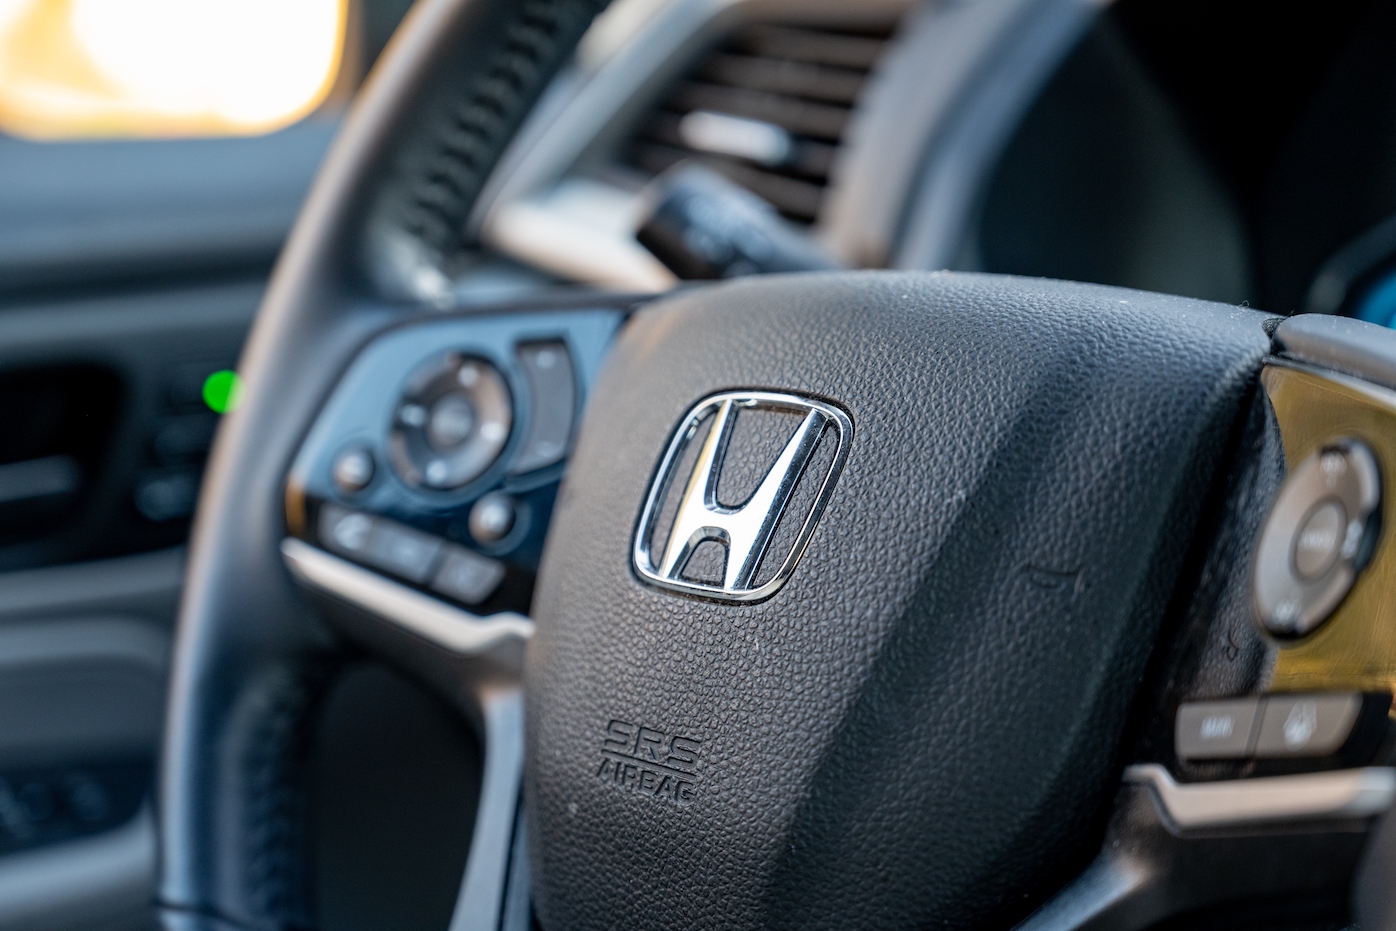 Close-up of Honda logo on steering wheel of a vehicle, with vehicle interior visible. Honda sales have made these models more popular